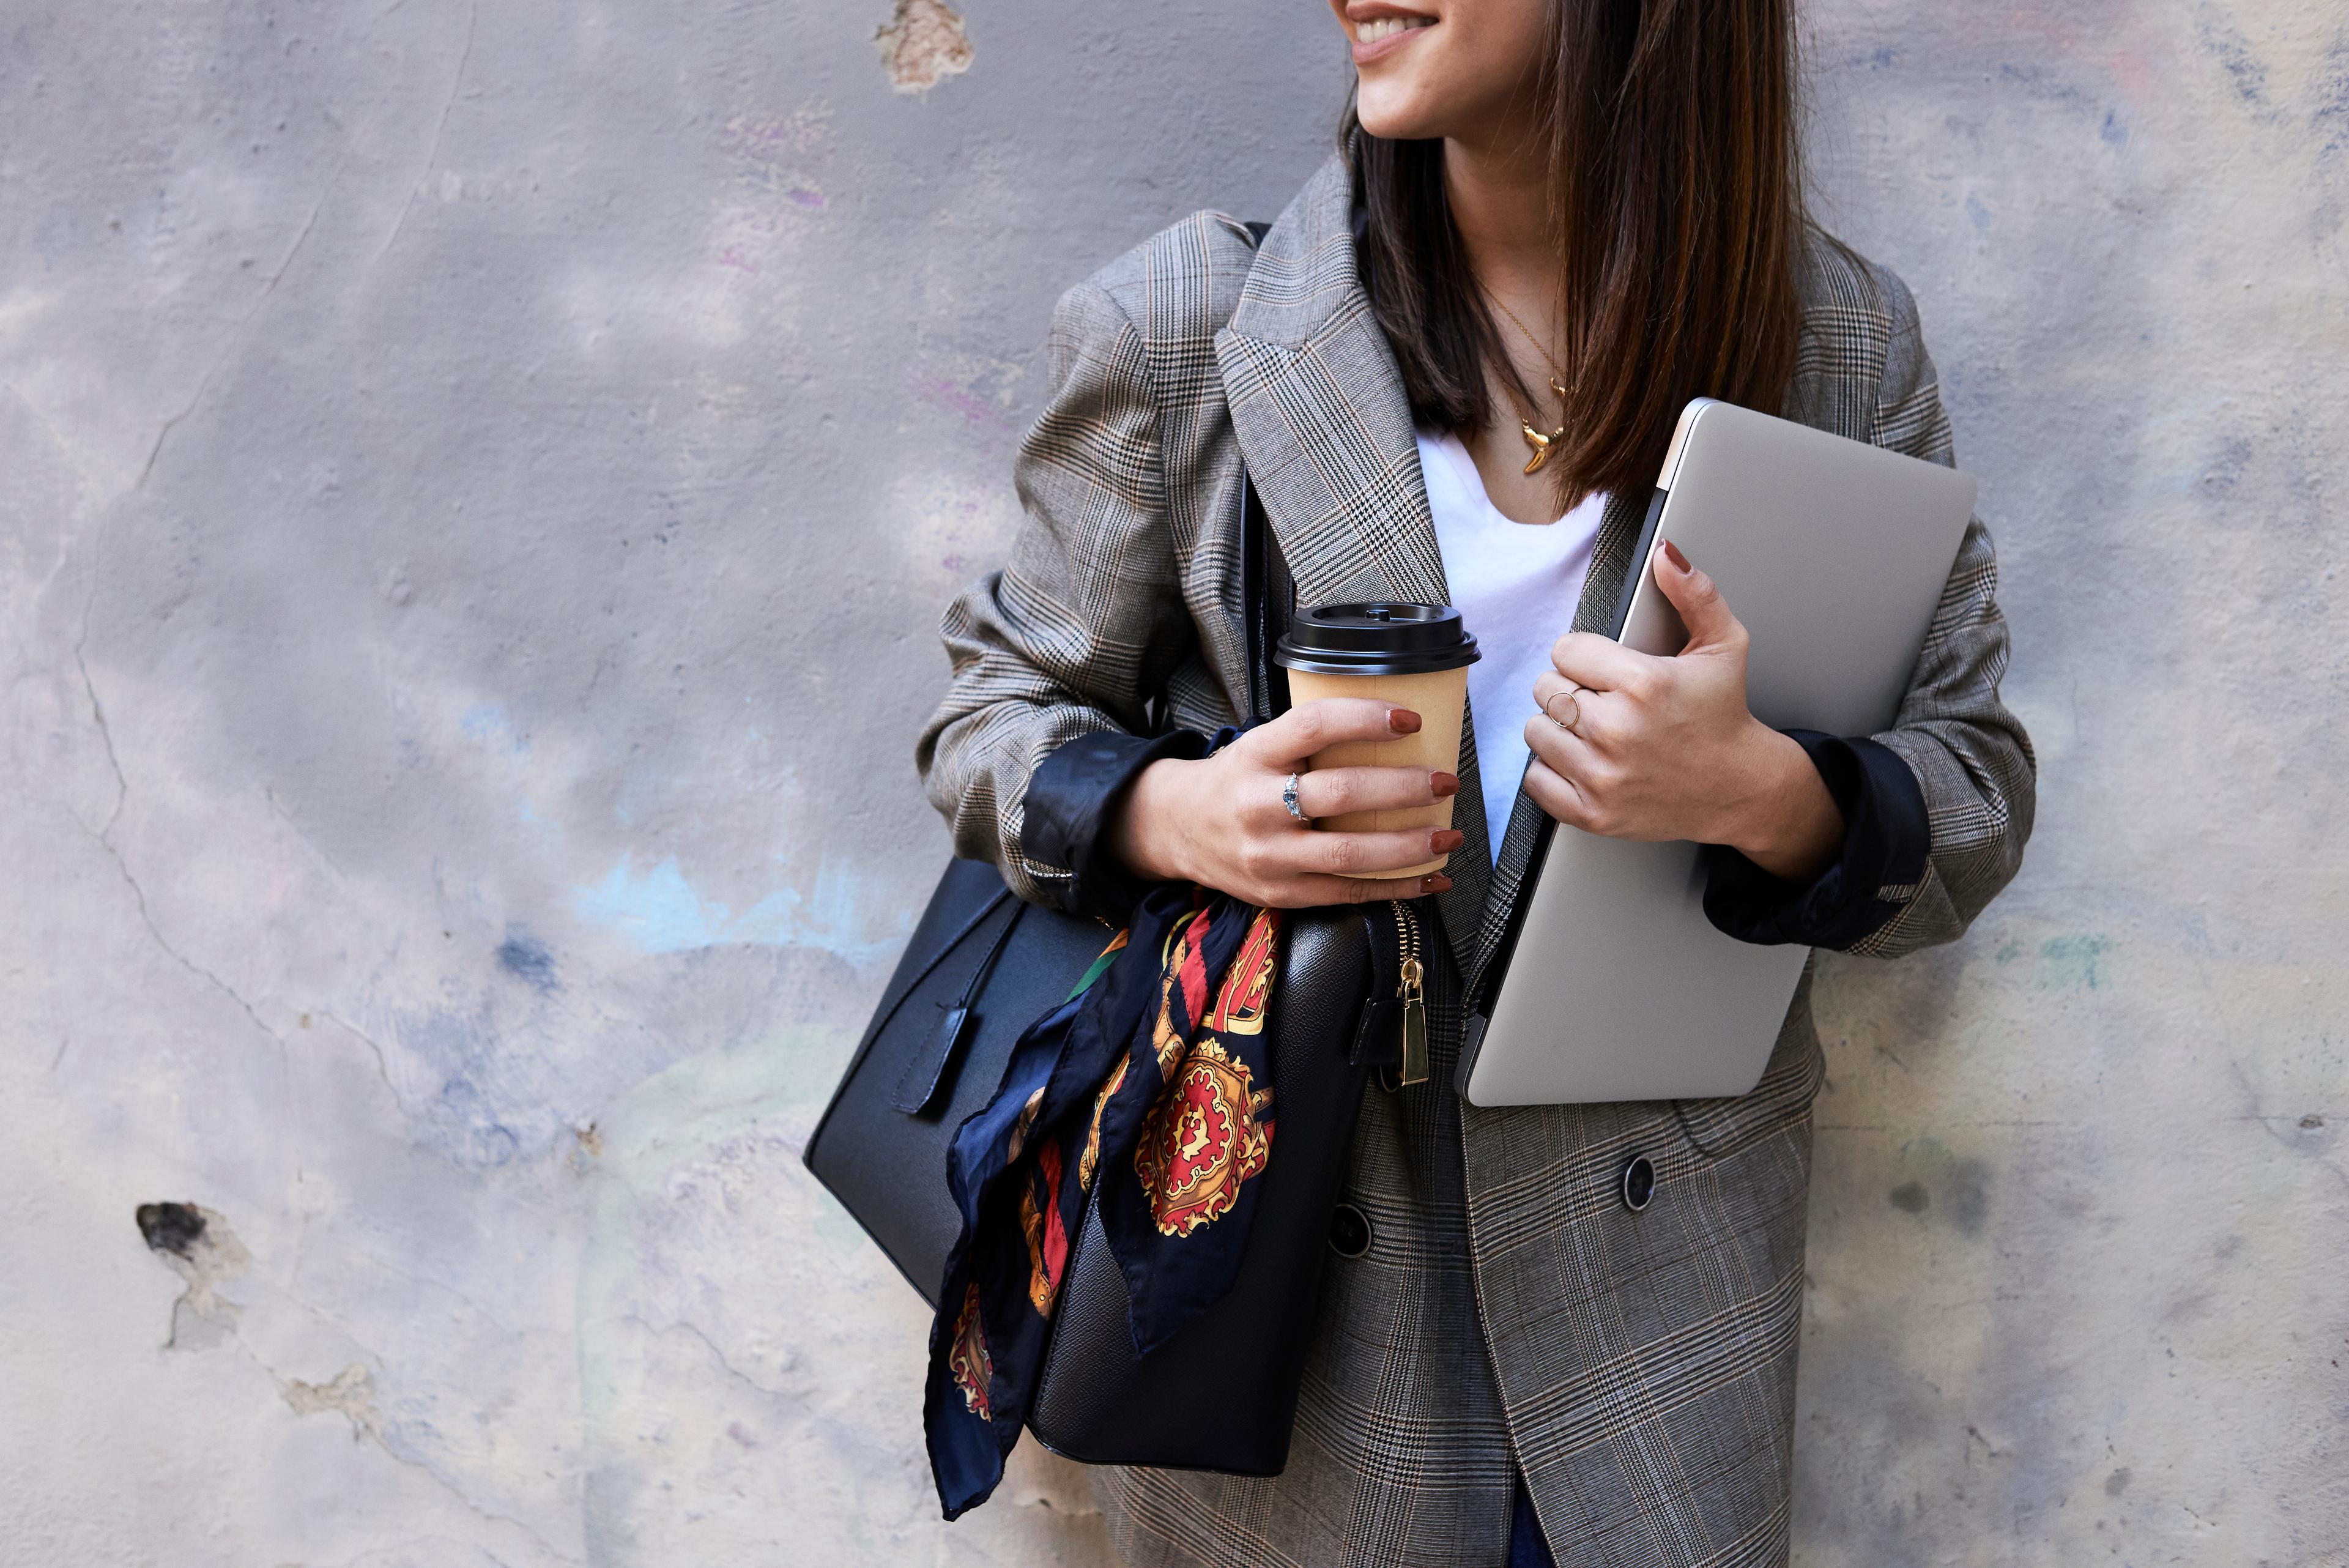 assistant smiling while holding a cup of coffee in one hand and a laptop in the other